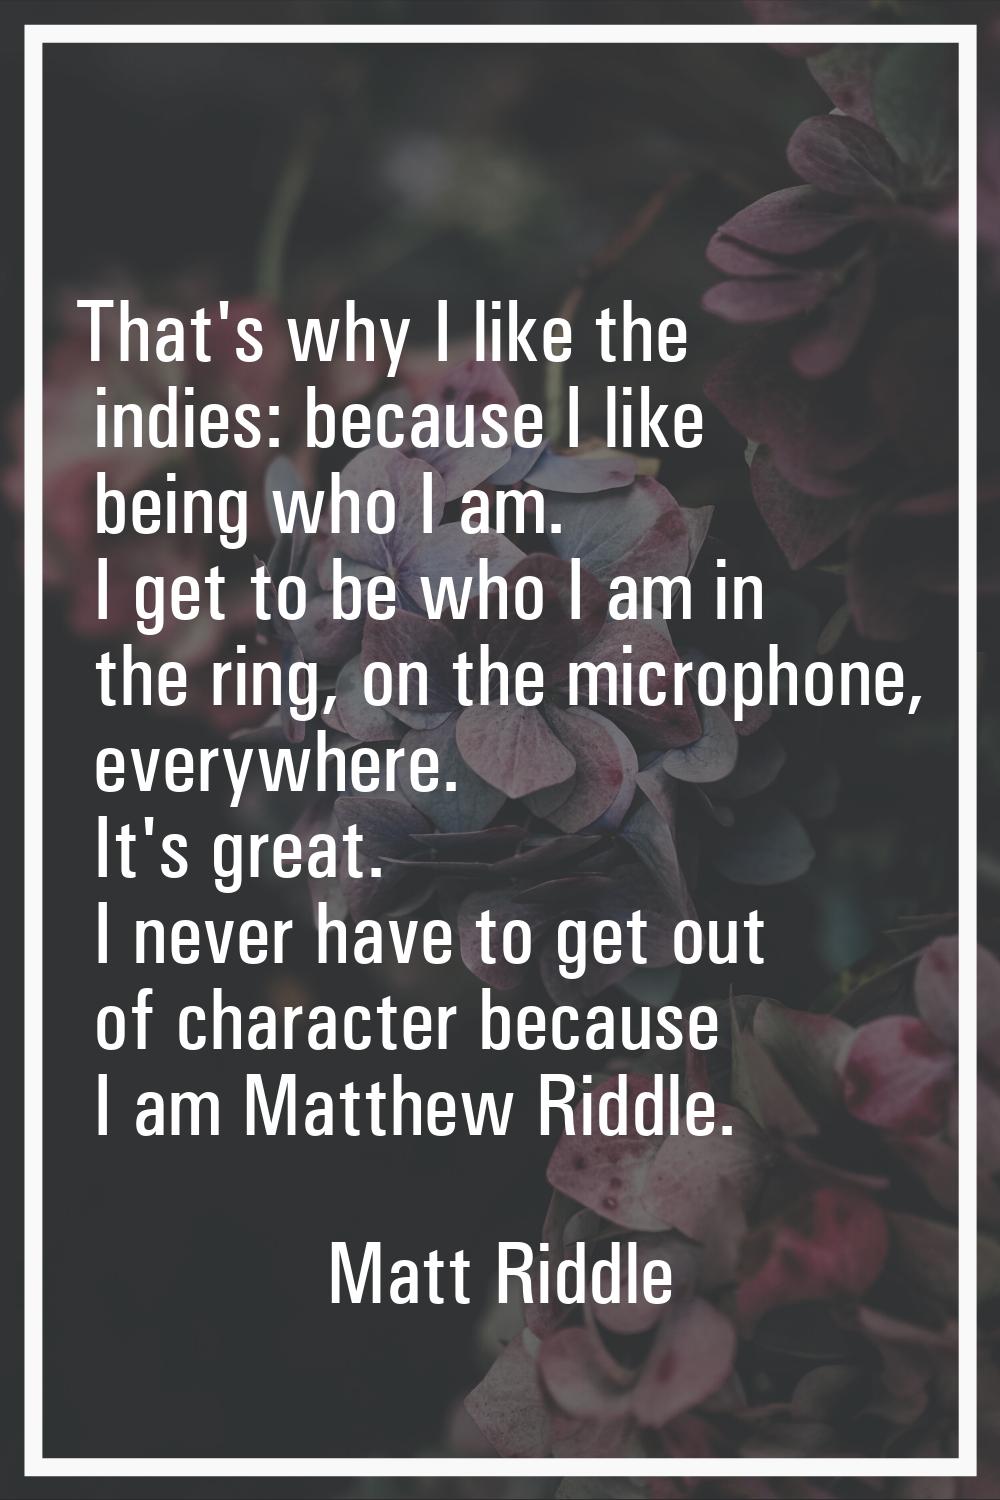 That's why I like the indies: because I like being who I am. I get to be who I am in the ring, on t